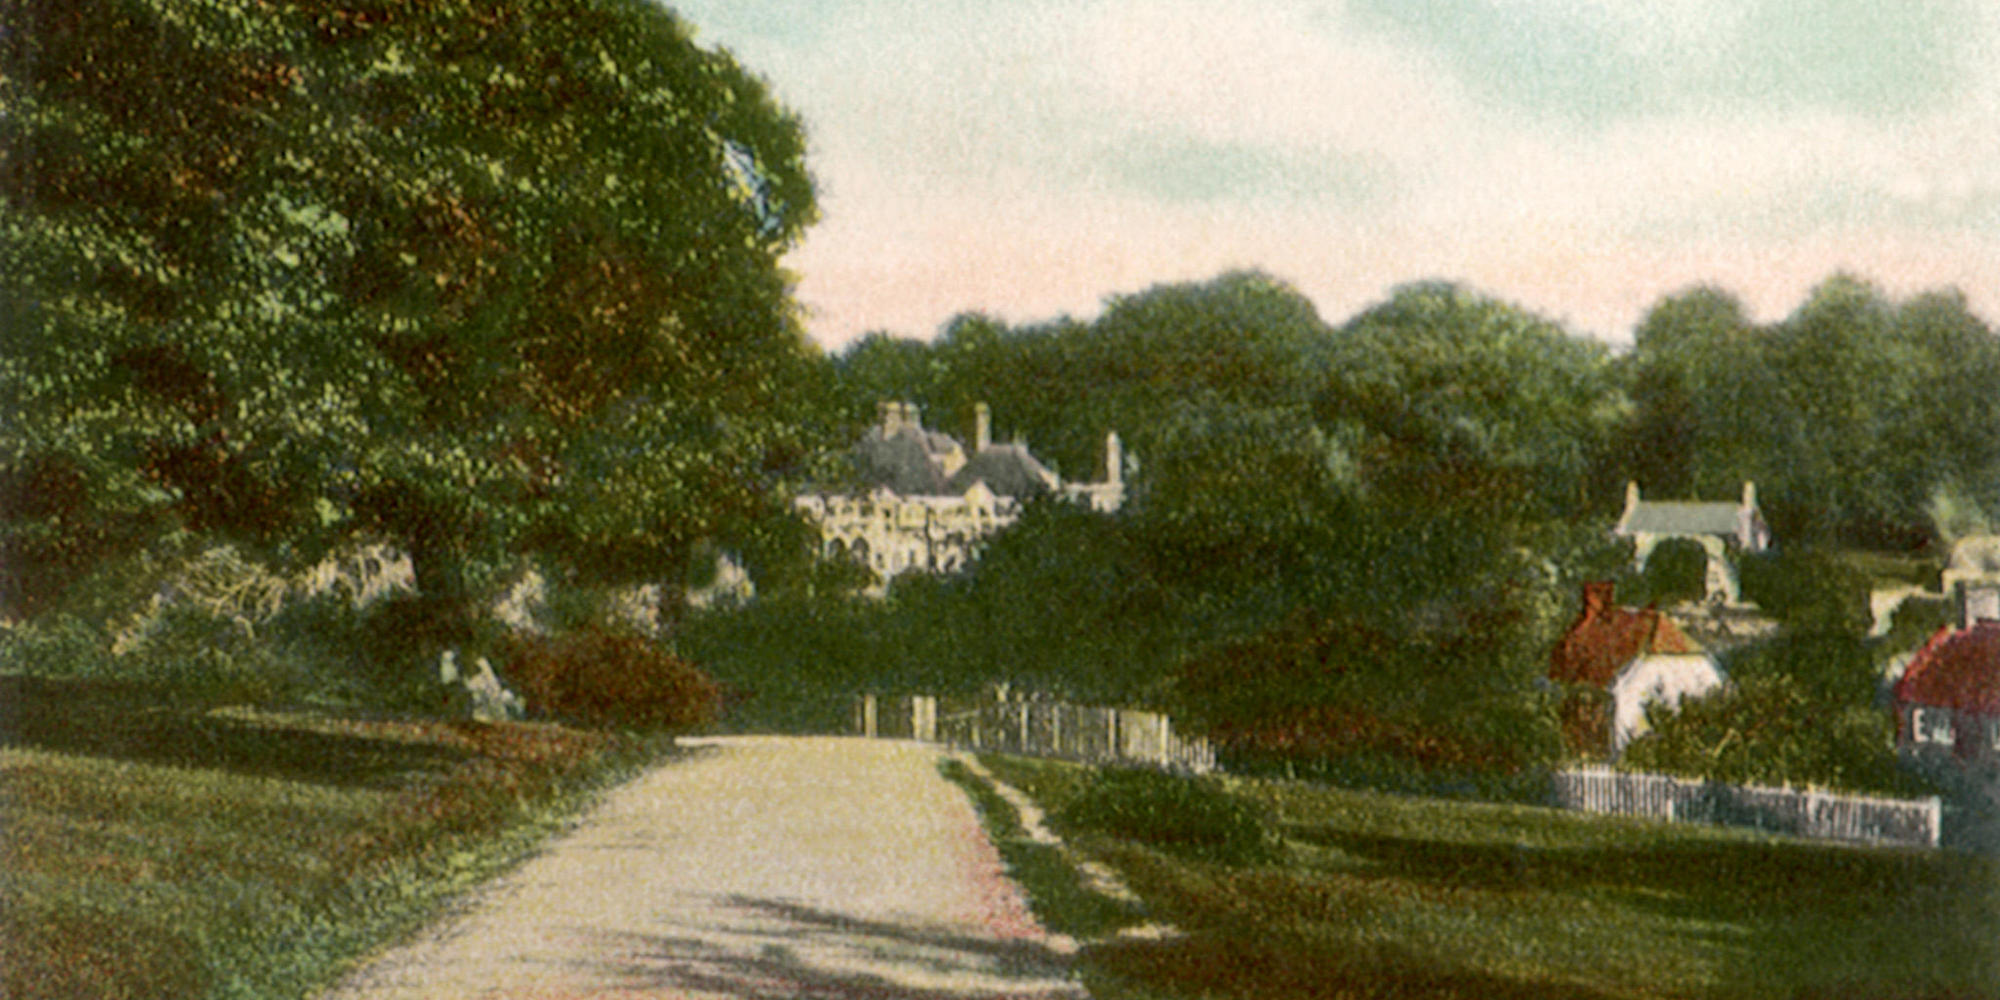 Bank at Lyndhurst, New Forest. c. 1910